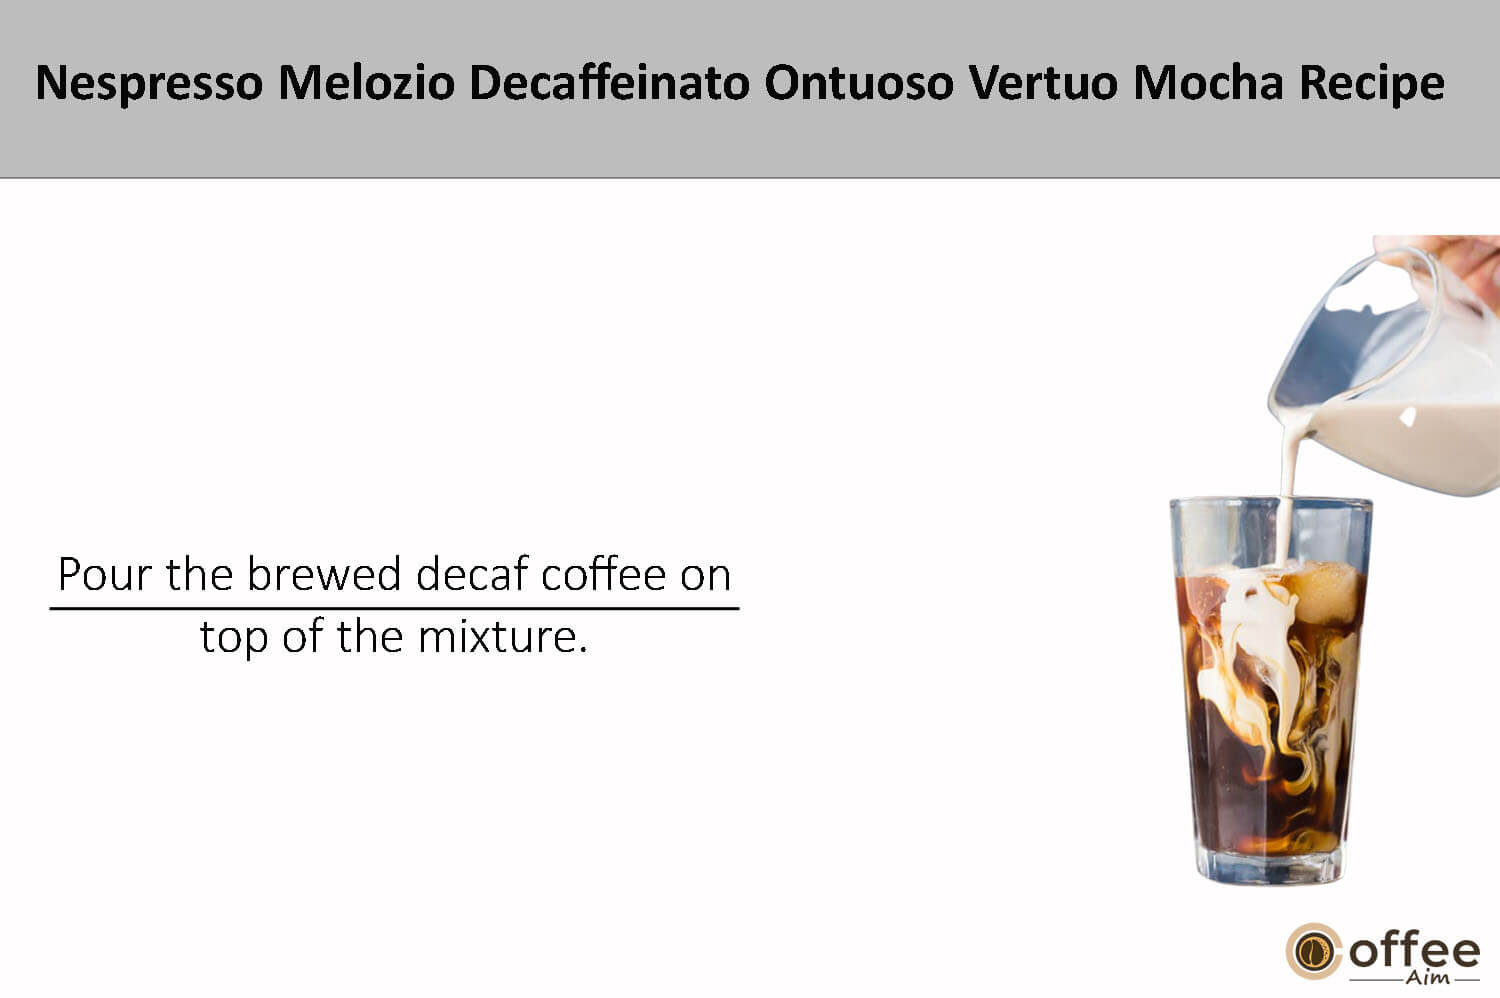 In this image i explain Pour the brewed decaf coffee on top of the mixture.